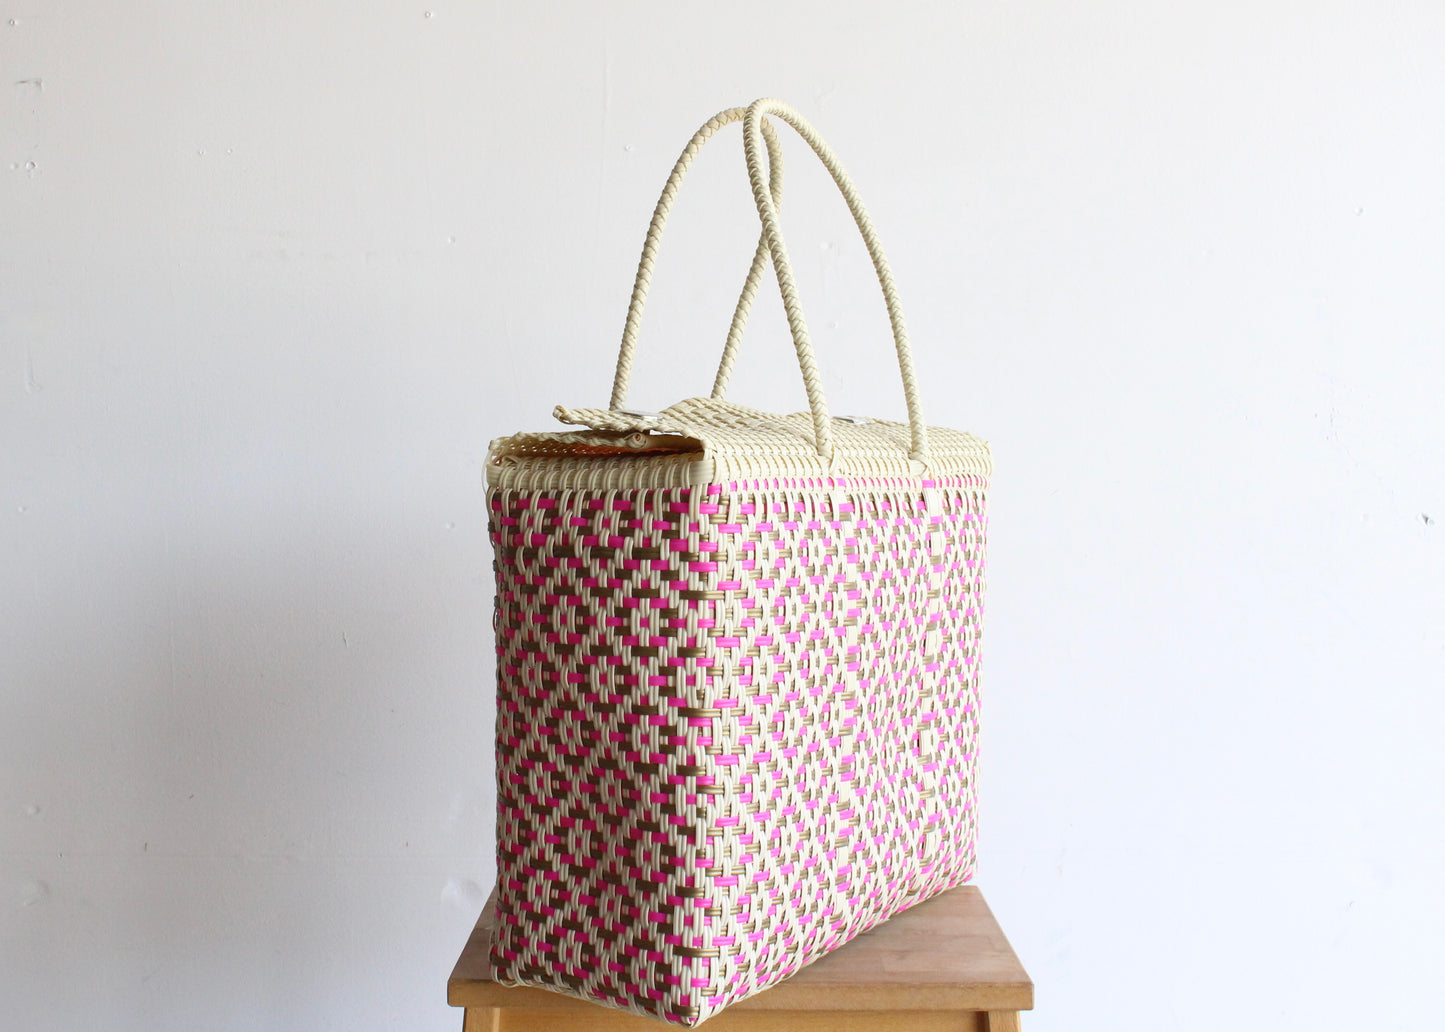 Gold, Pink & Beige Handwoven Mexican Basket by MexiMexi